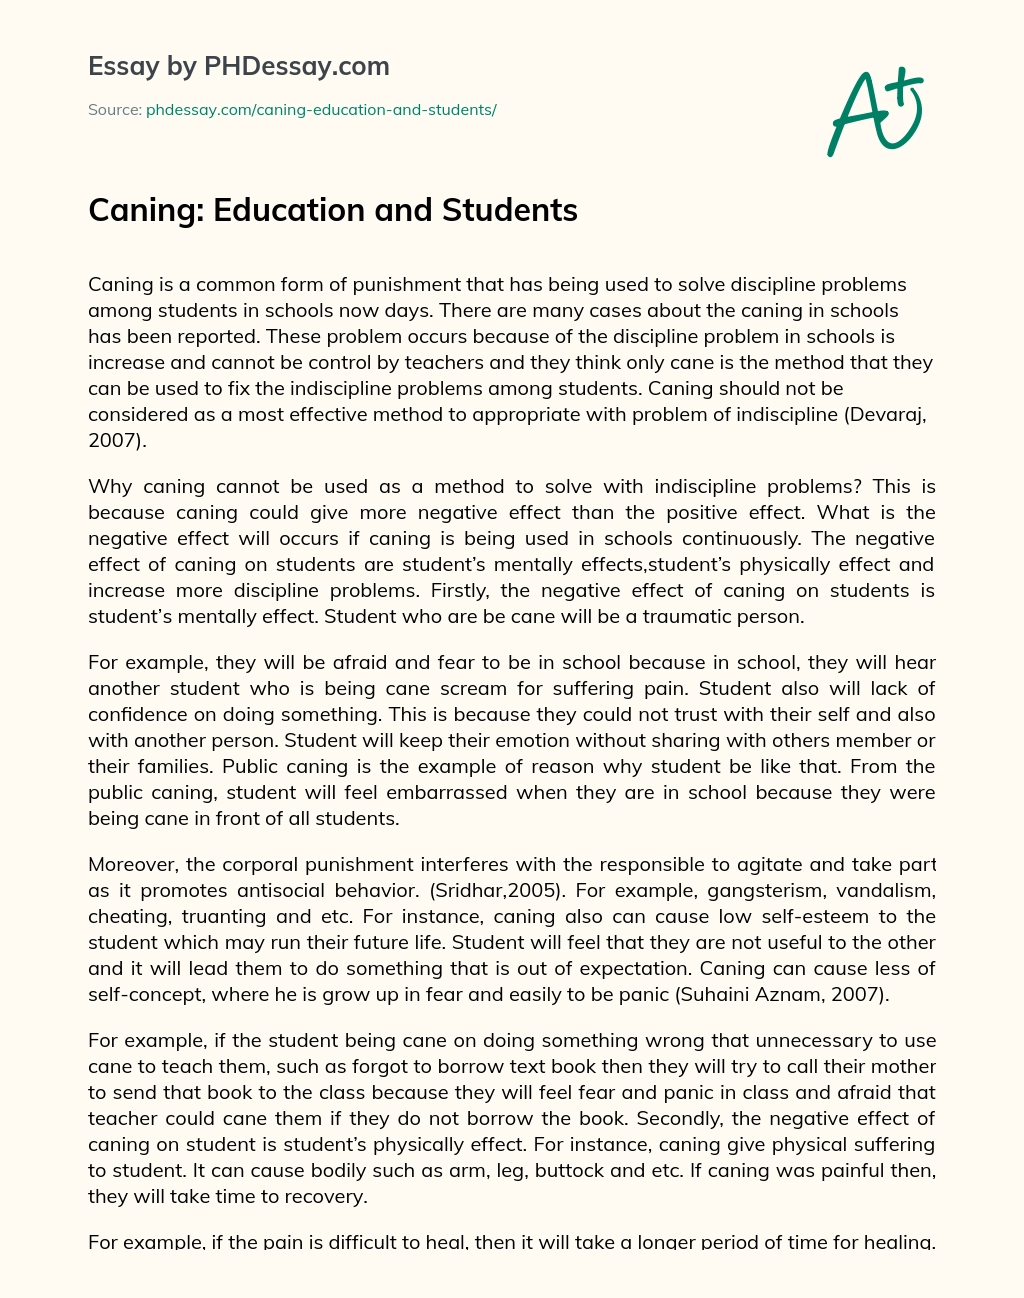 Caning: Education and Students essay